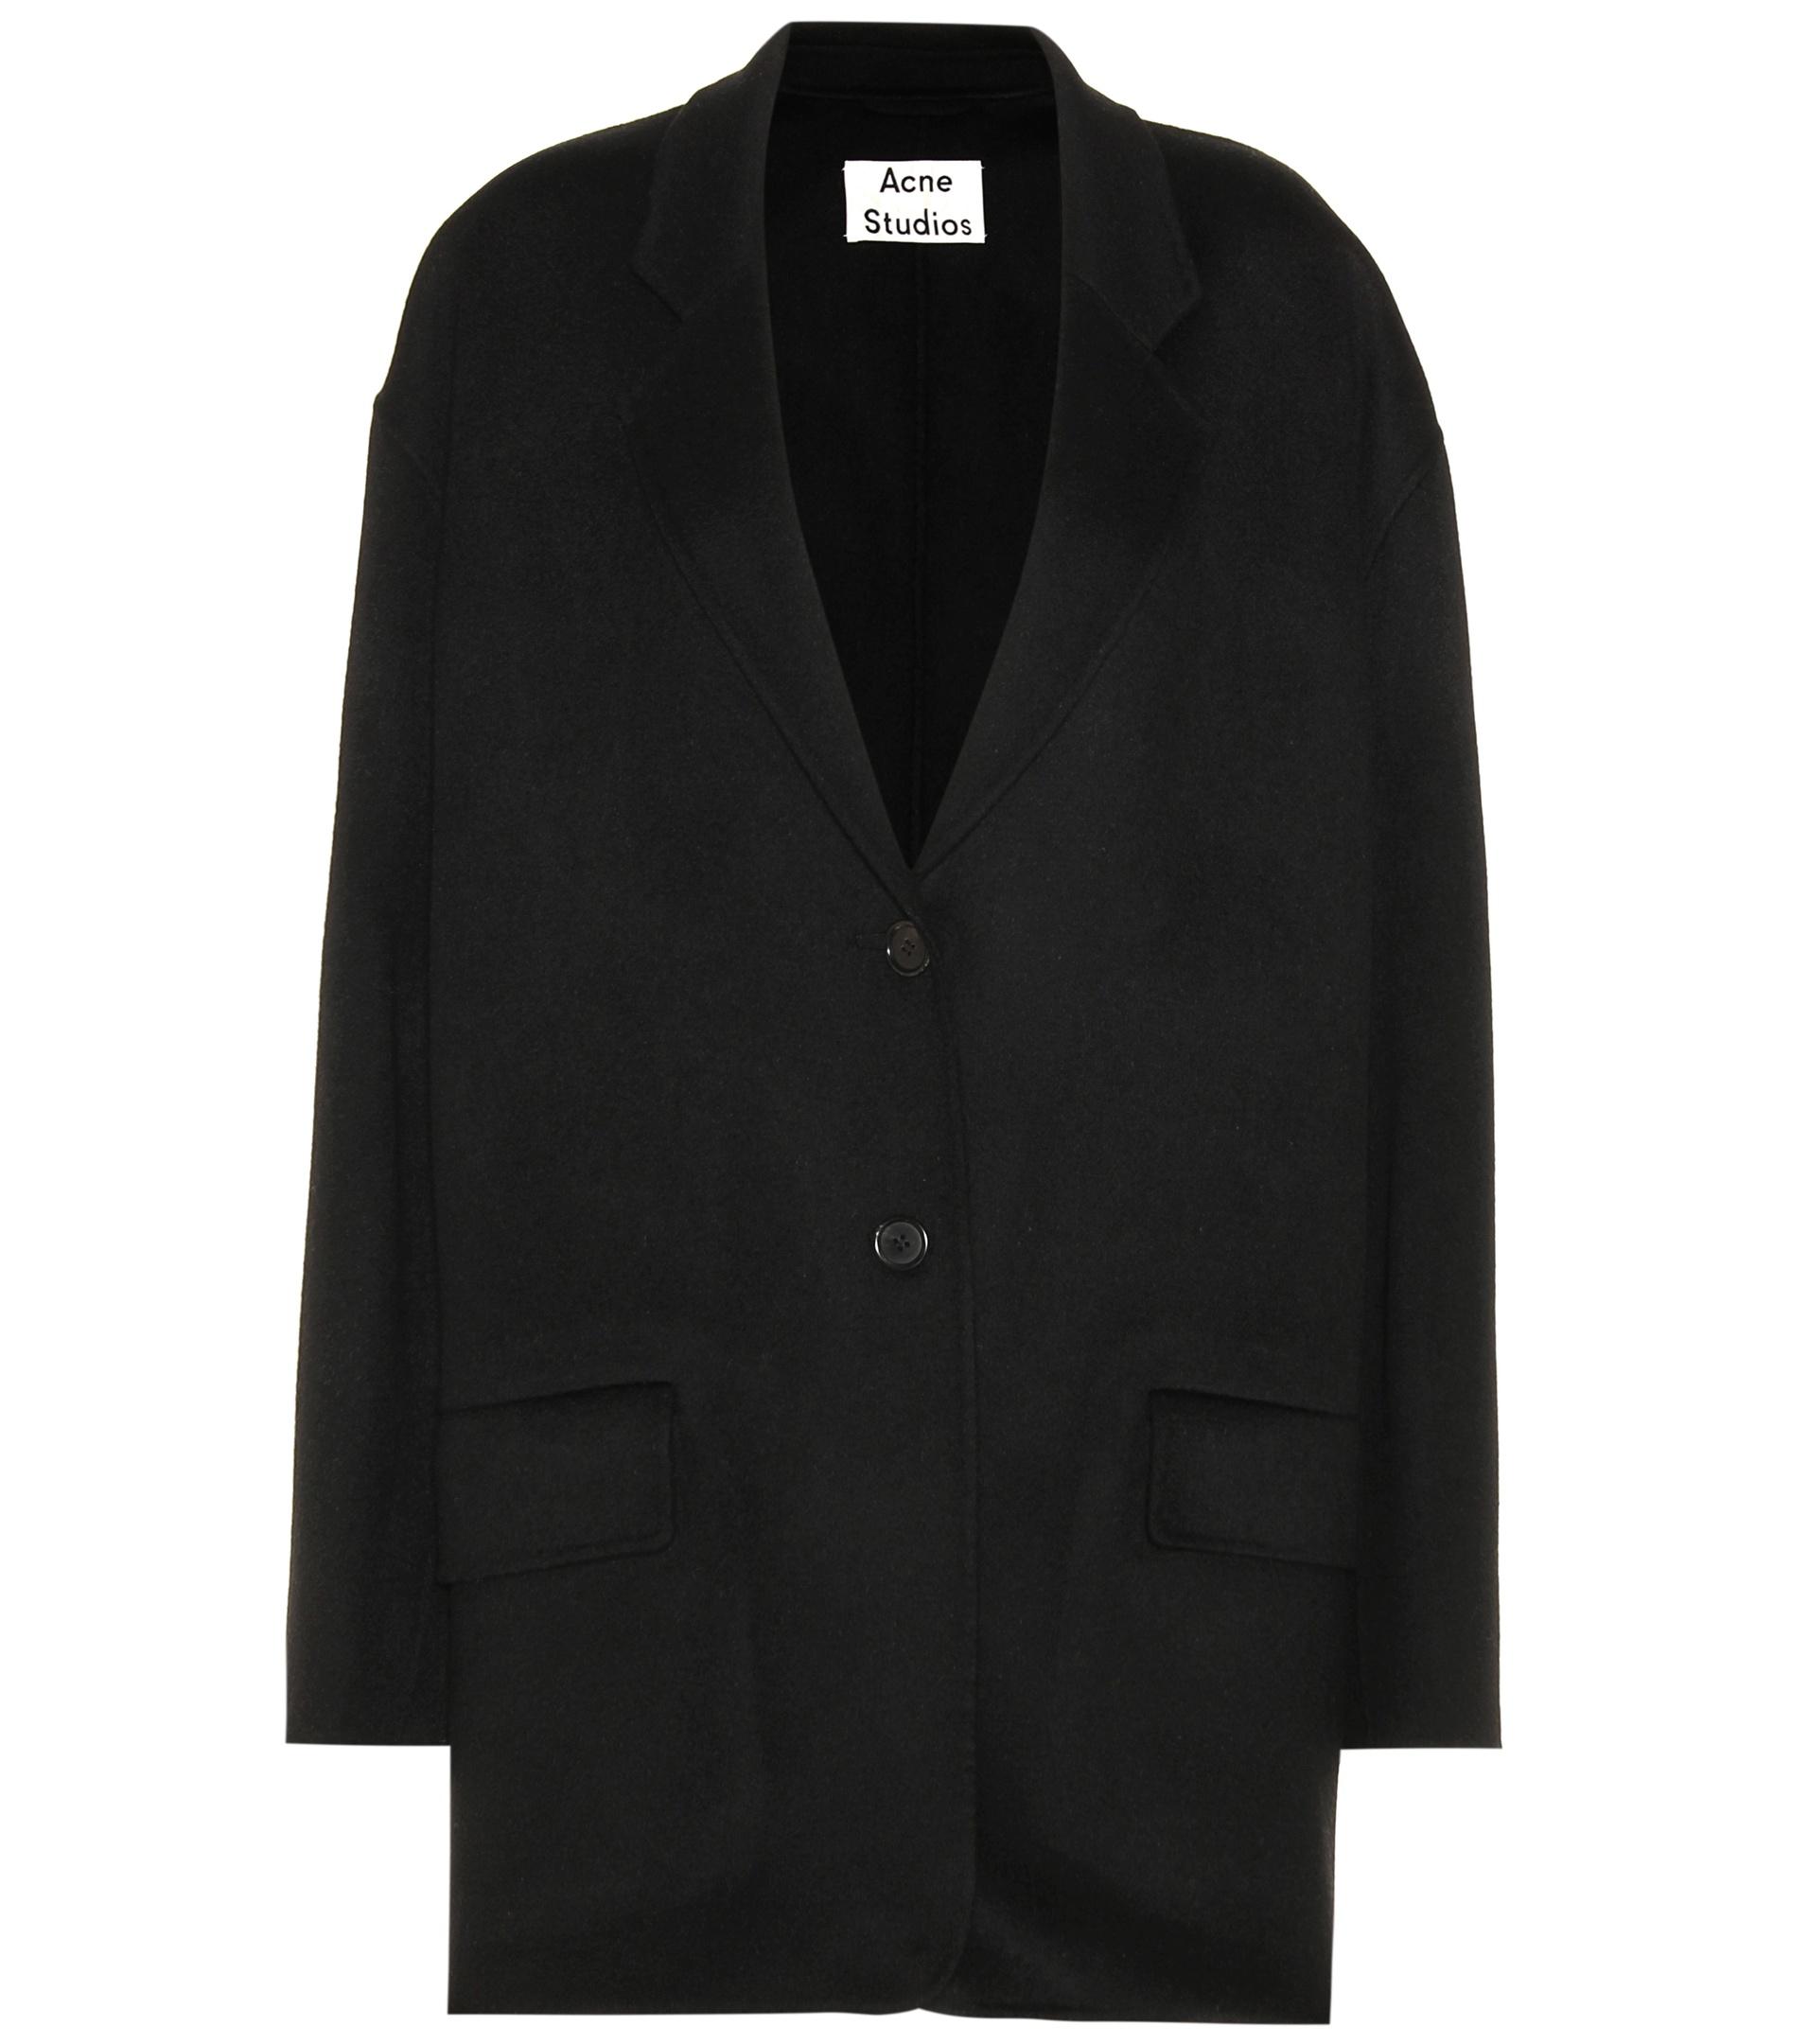 Lyst - Acne Studios Wool And Cashmere Coat in Black